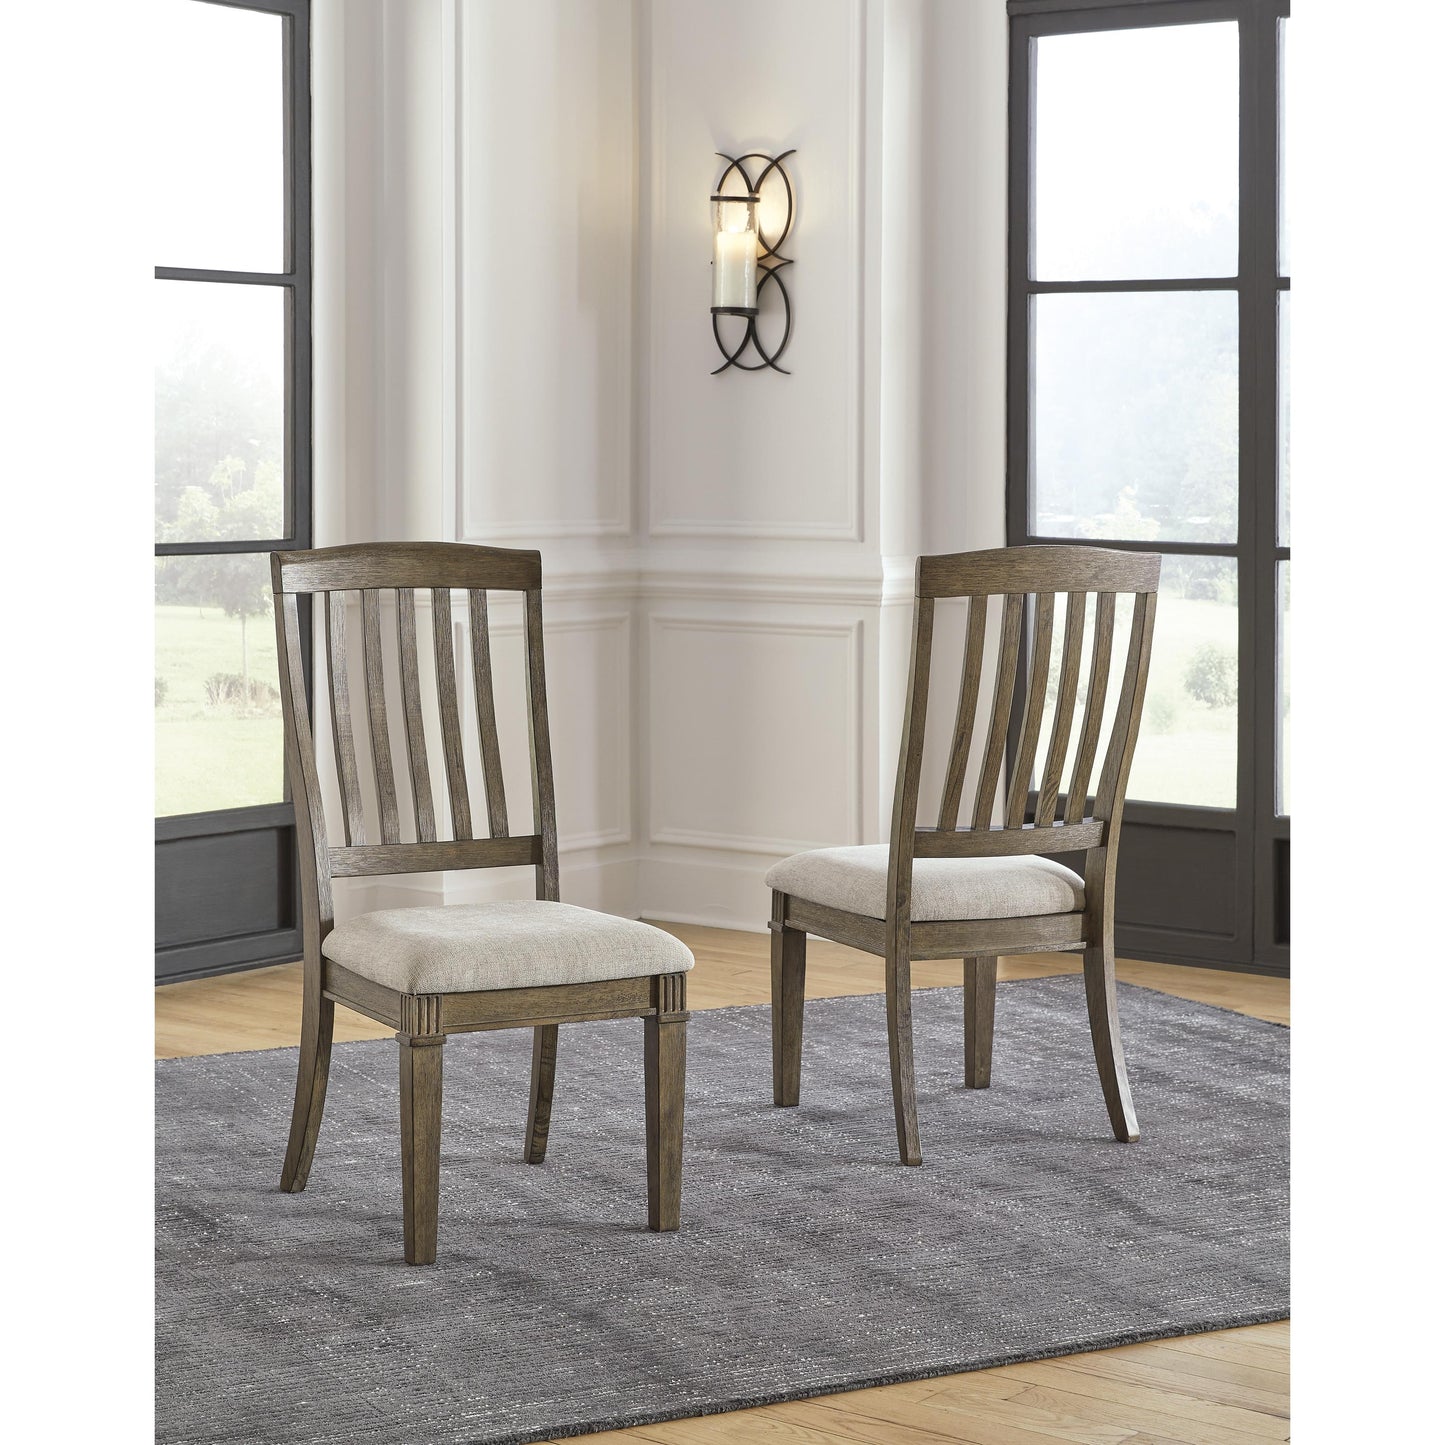 Signature Design by Ashley Markenburg Dining Chair D770-01 IMAGE 5